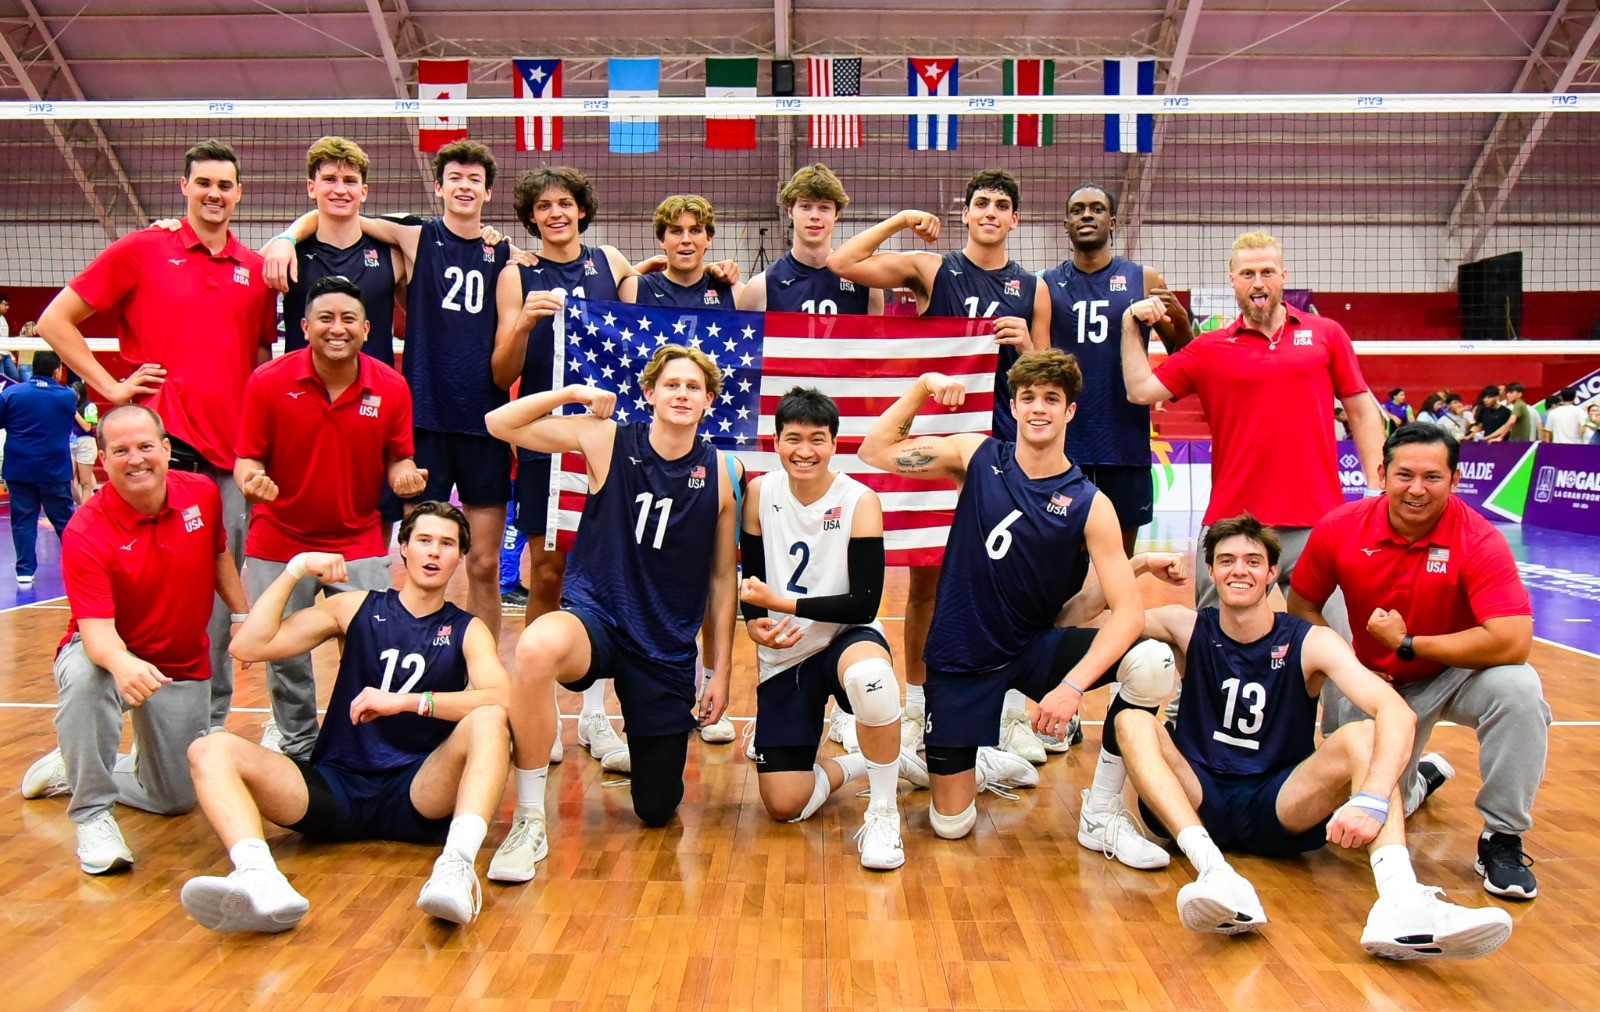 United States Faces Canada for the U21 NORCECA Gold